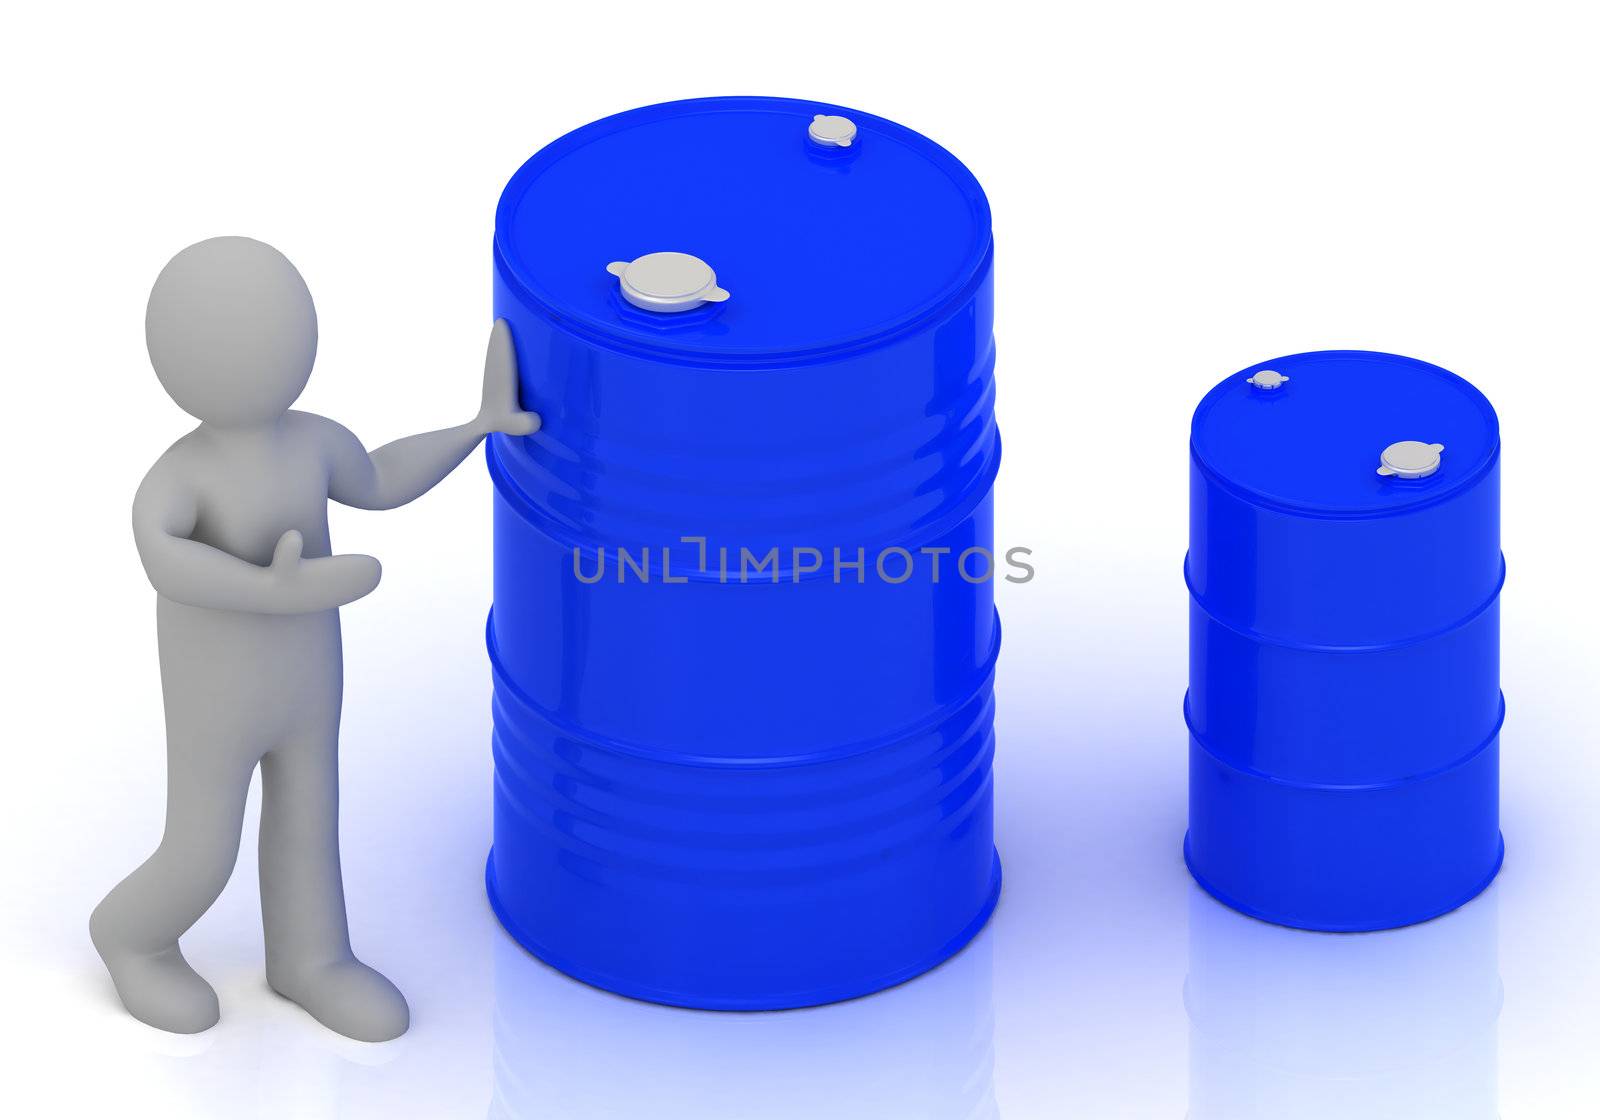 3D little person shows a blue barrel of oil. Abstract illustration on a white background